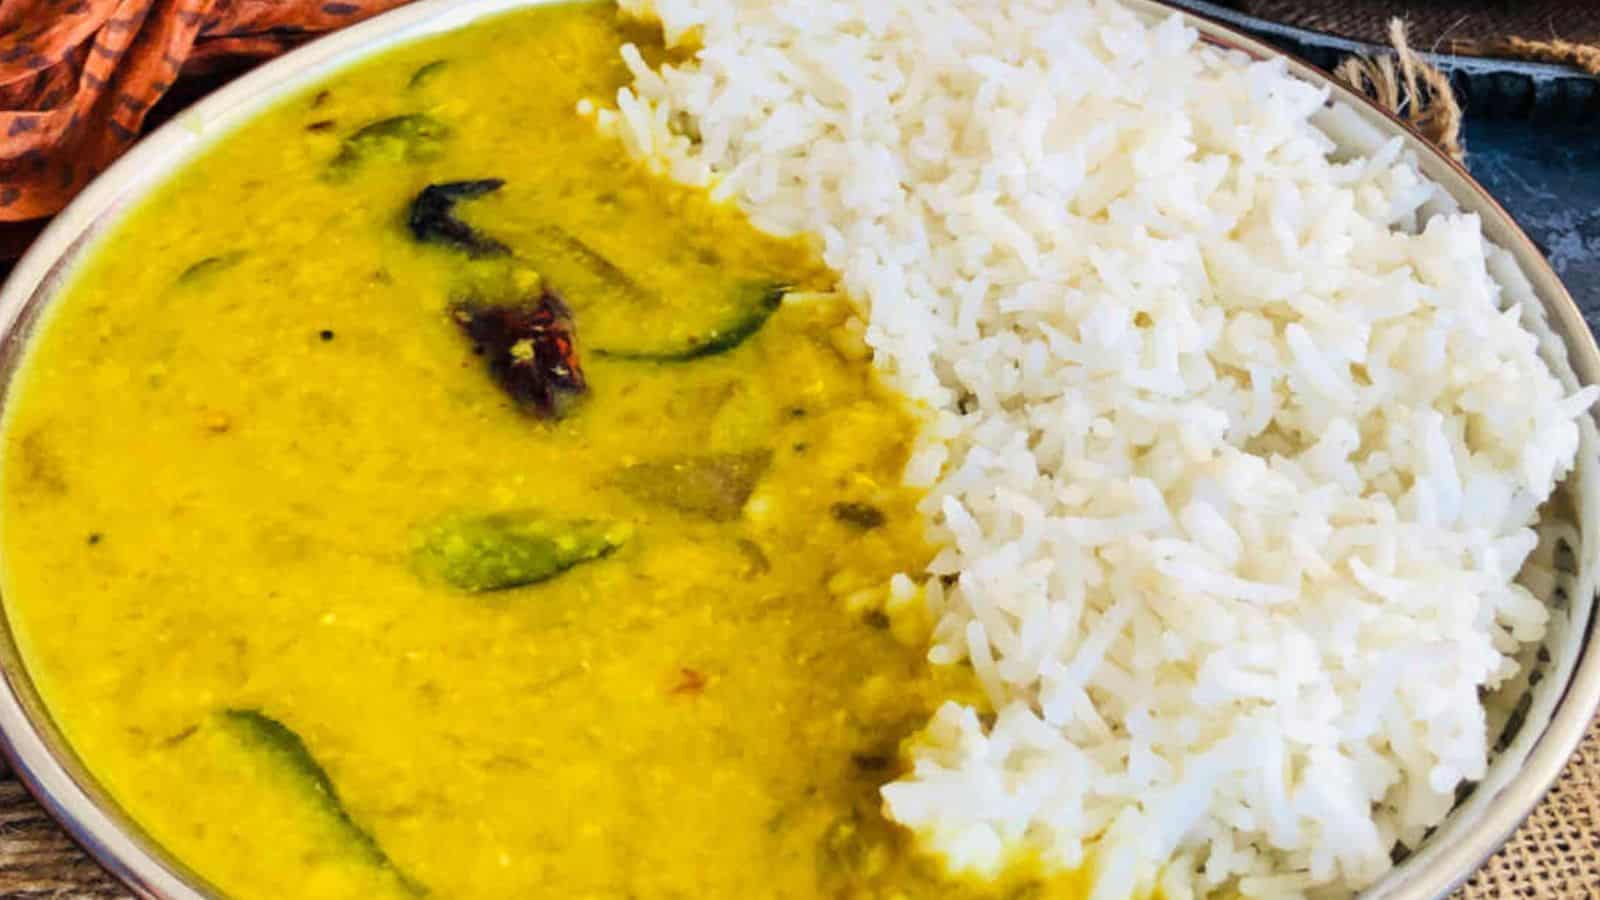 A plate of white rice paired with yellow dal garnished with chili peppers and curry leaves.